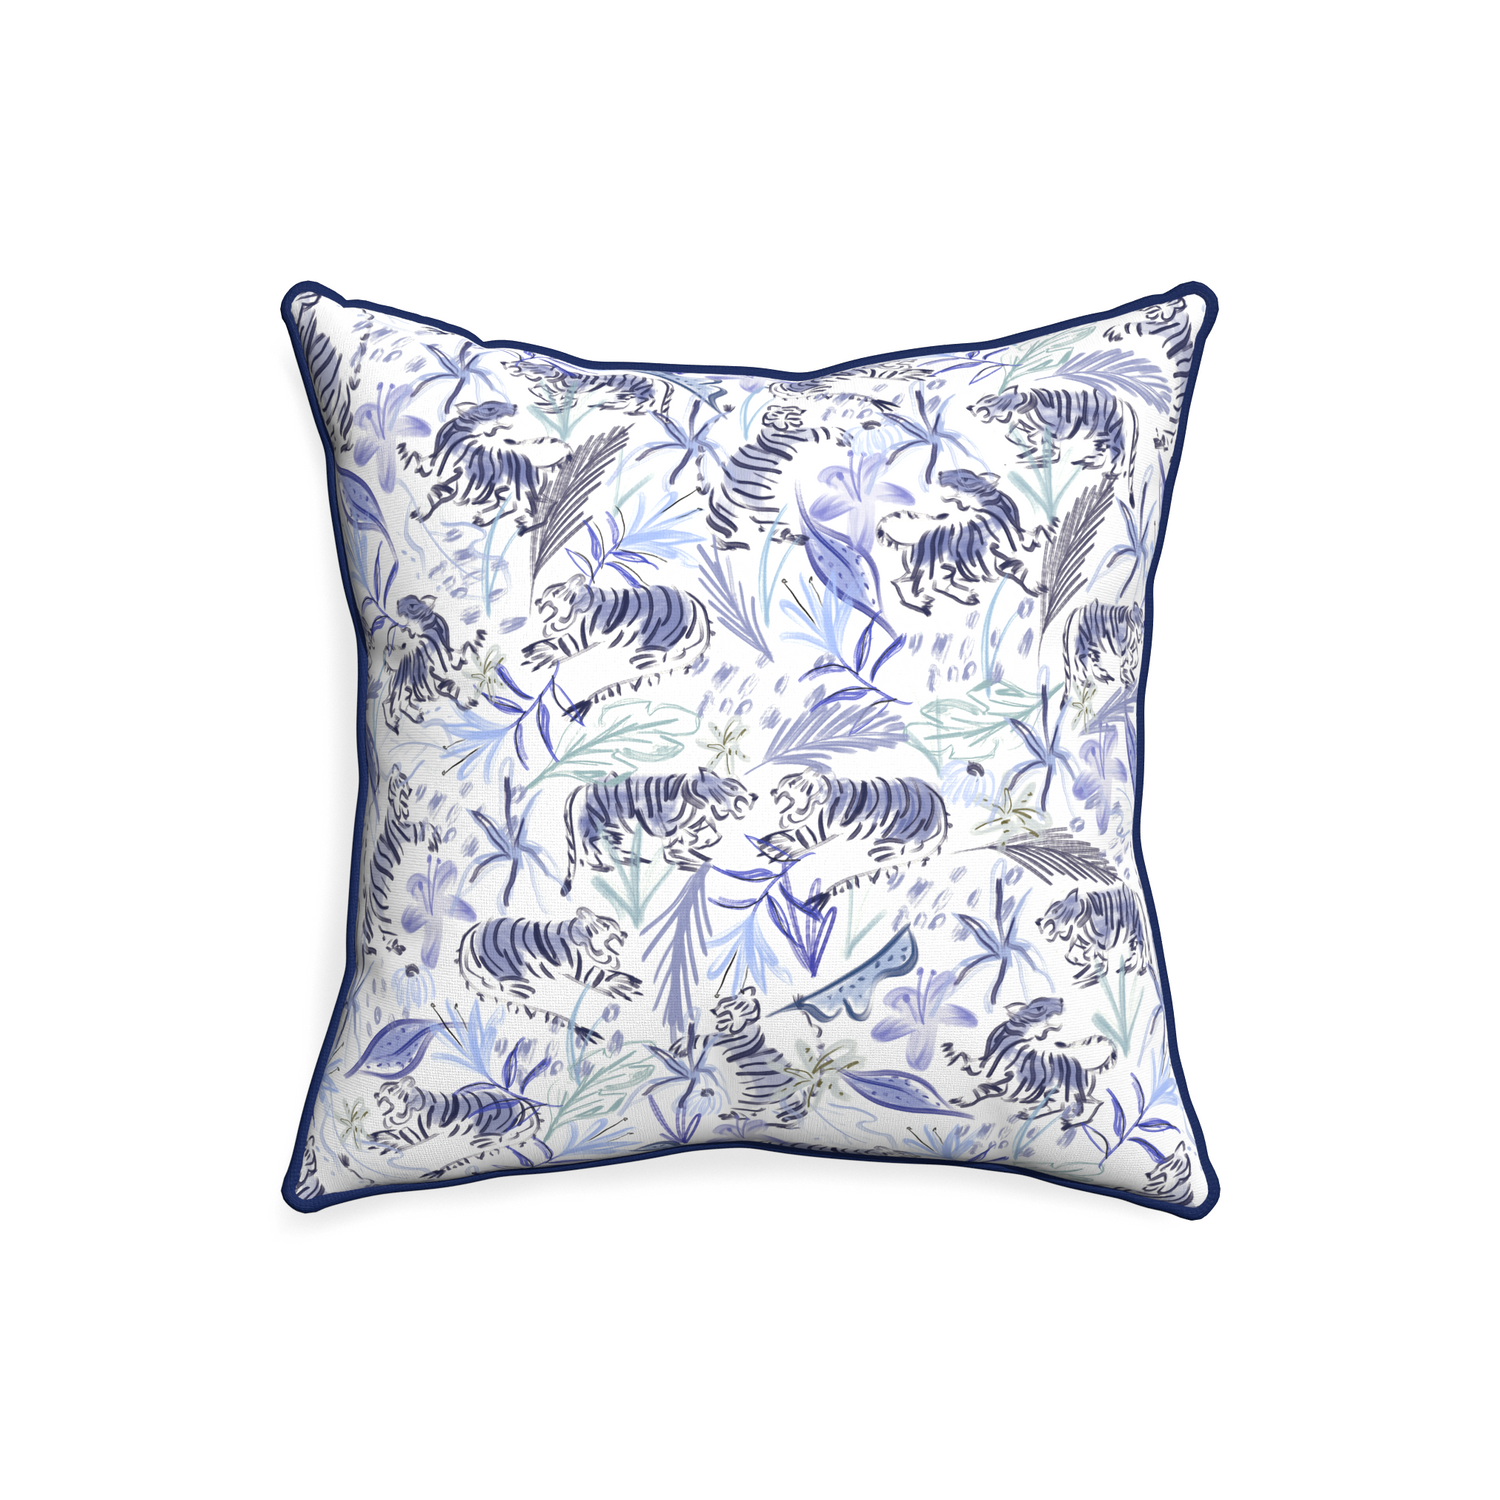 20-square frida blue custom blue with intricate tiger designpillow with midnight piping on white background